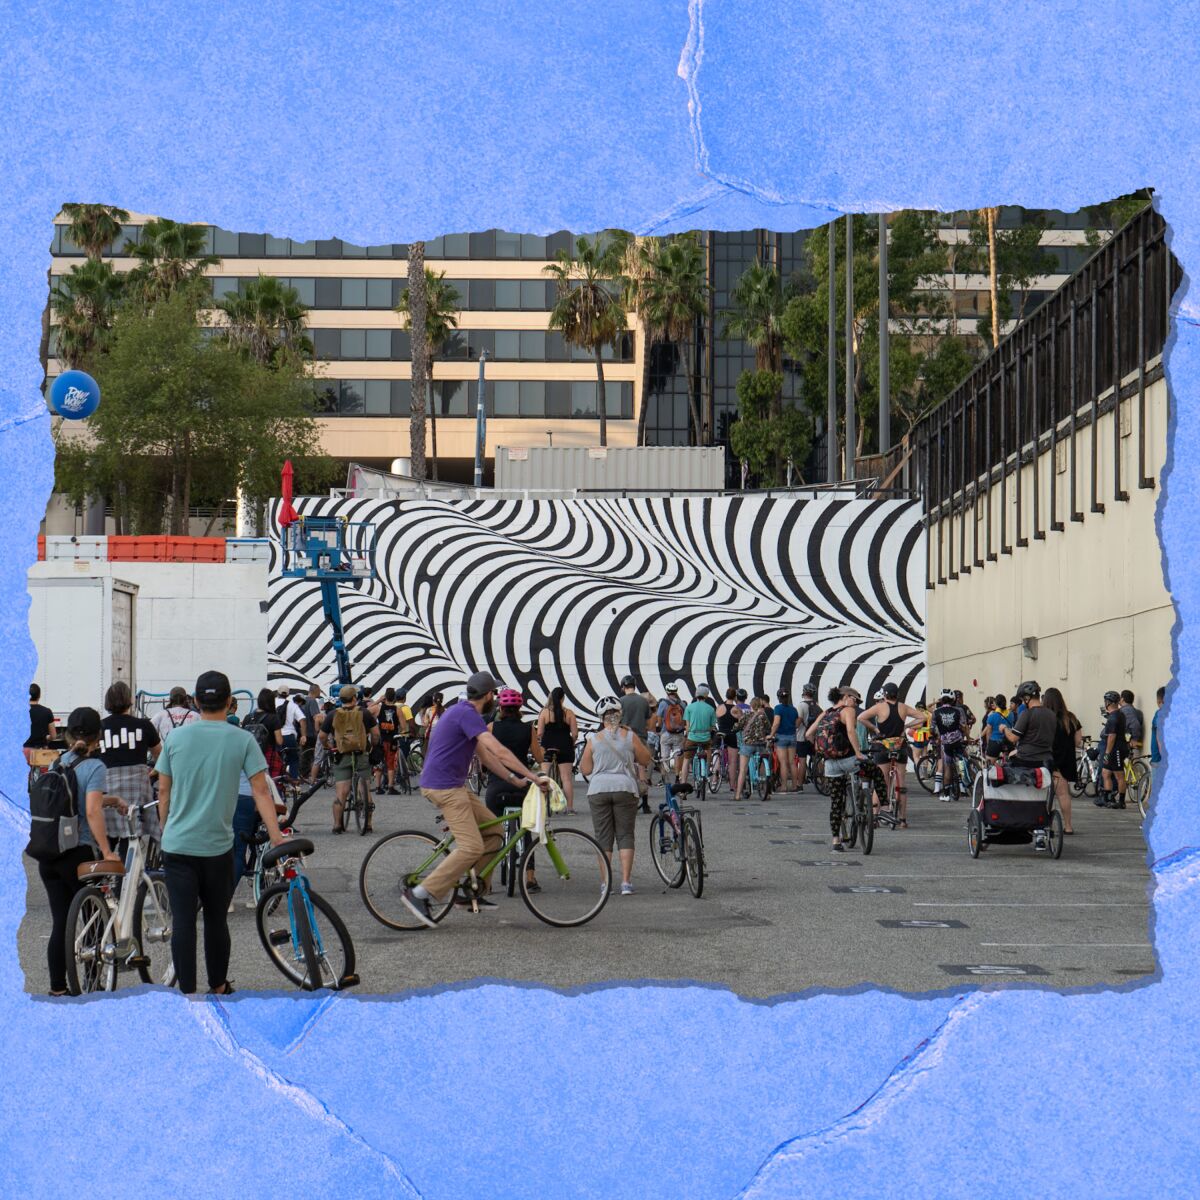 People on bikes stand in front of a large wall mural of undulating black and white lines.